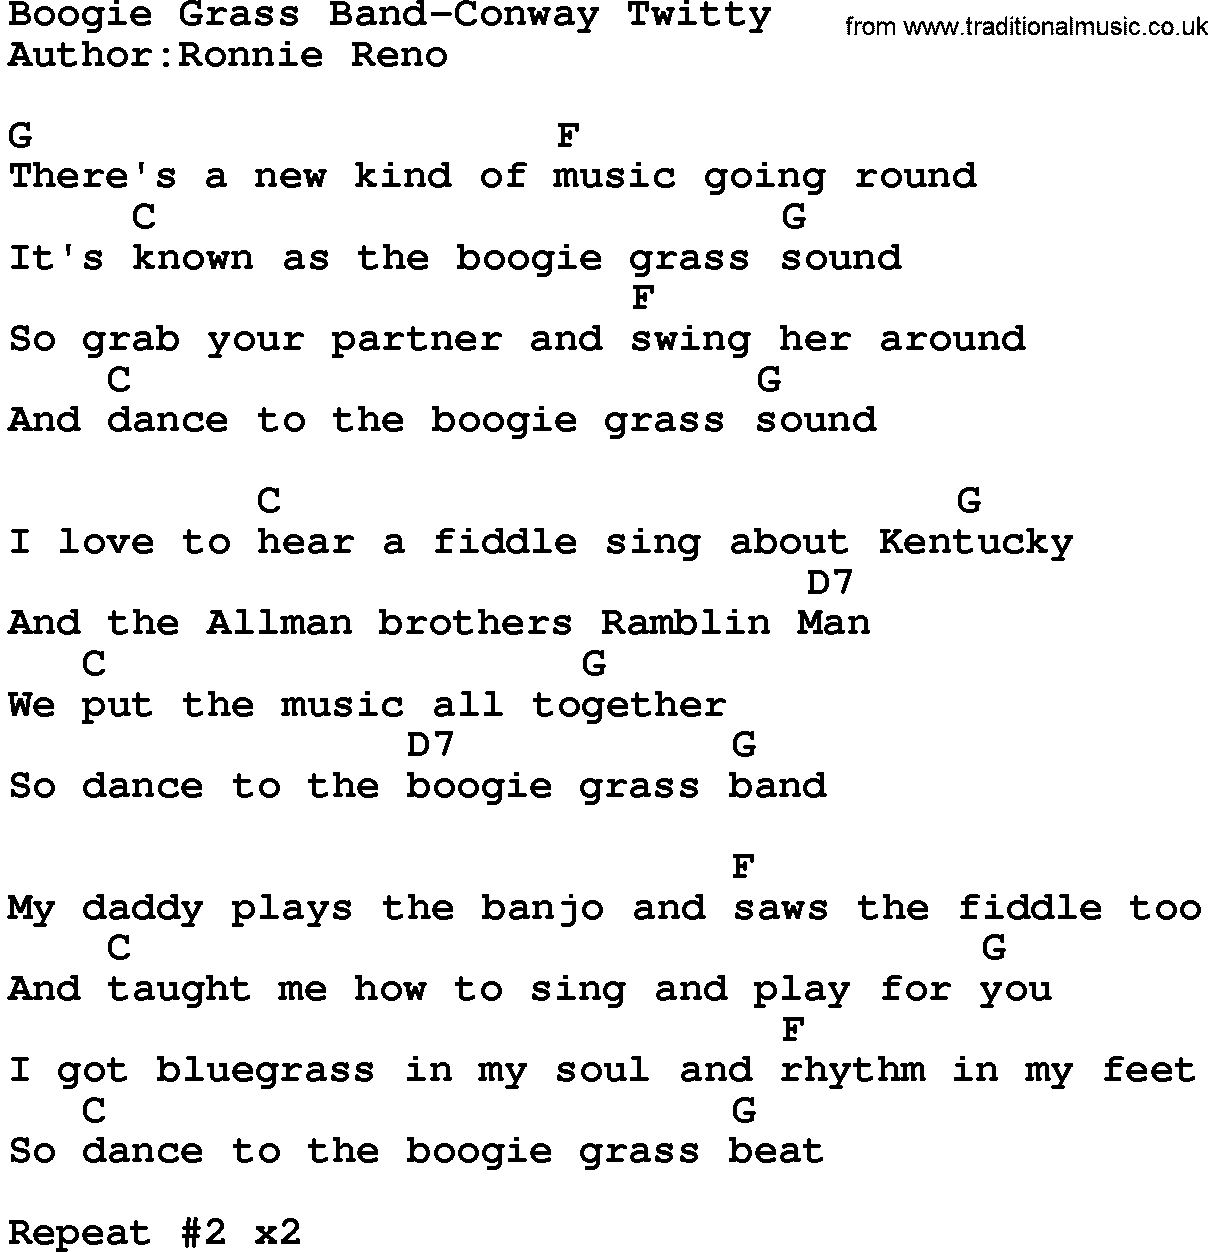 Country music song: Boogie Grass Band-Conway Twitty lyrics and chords